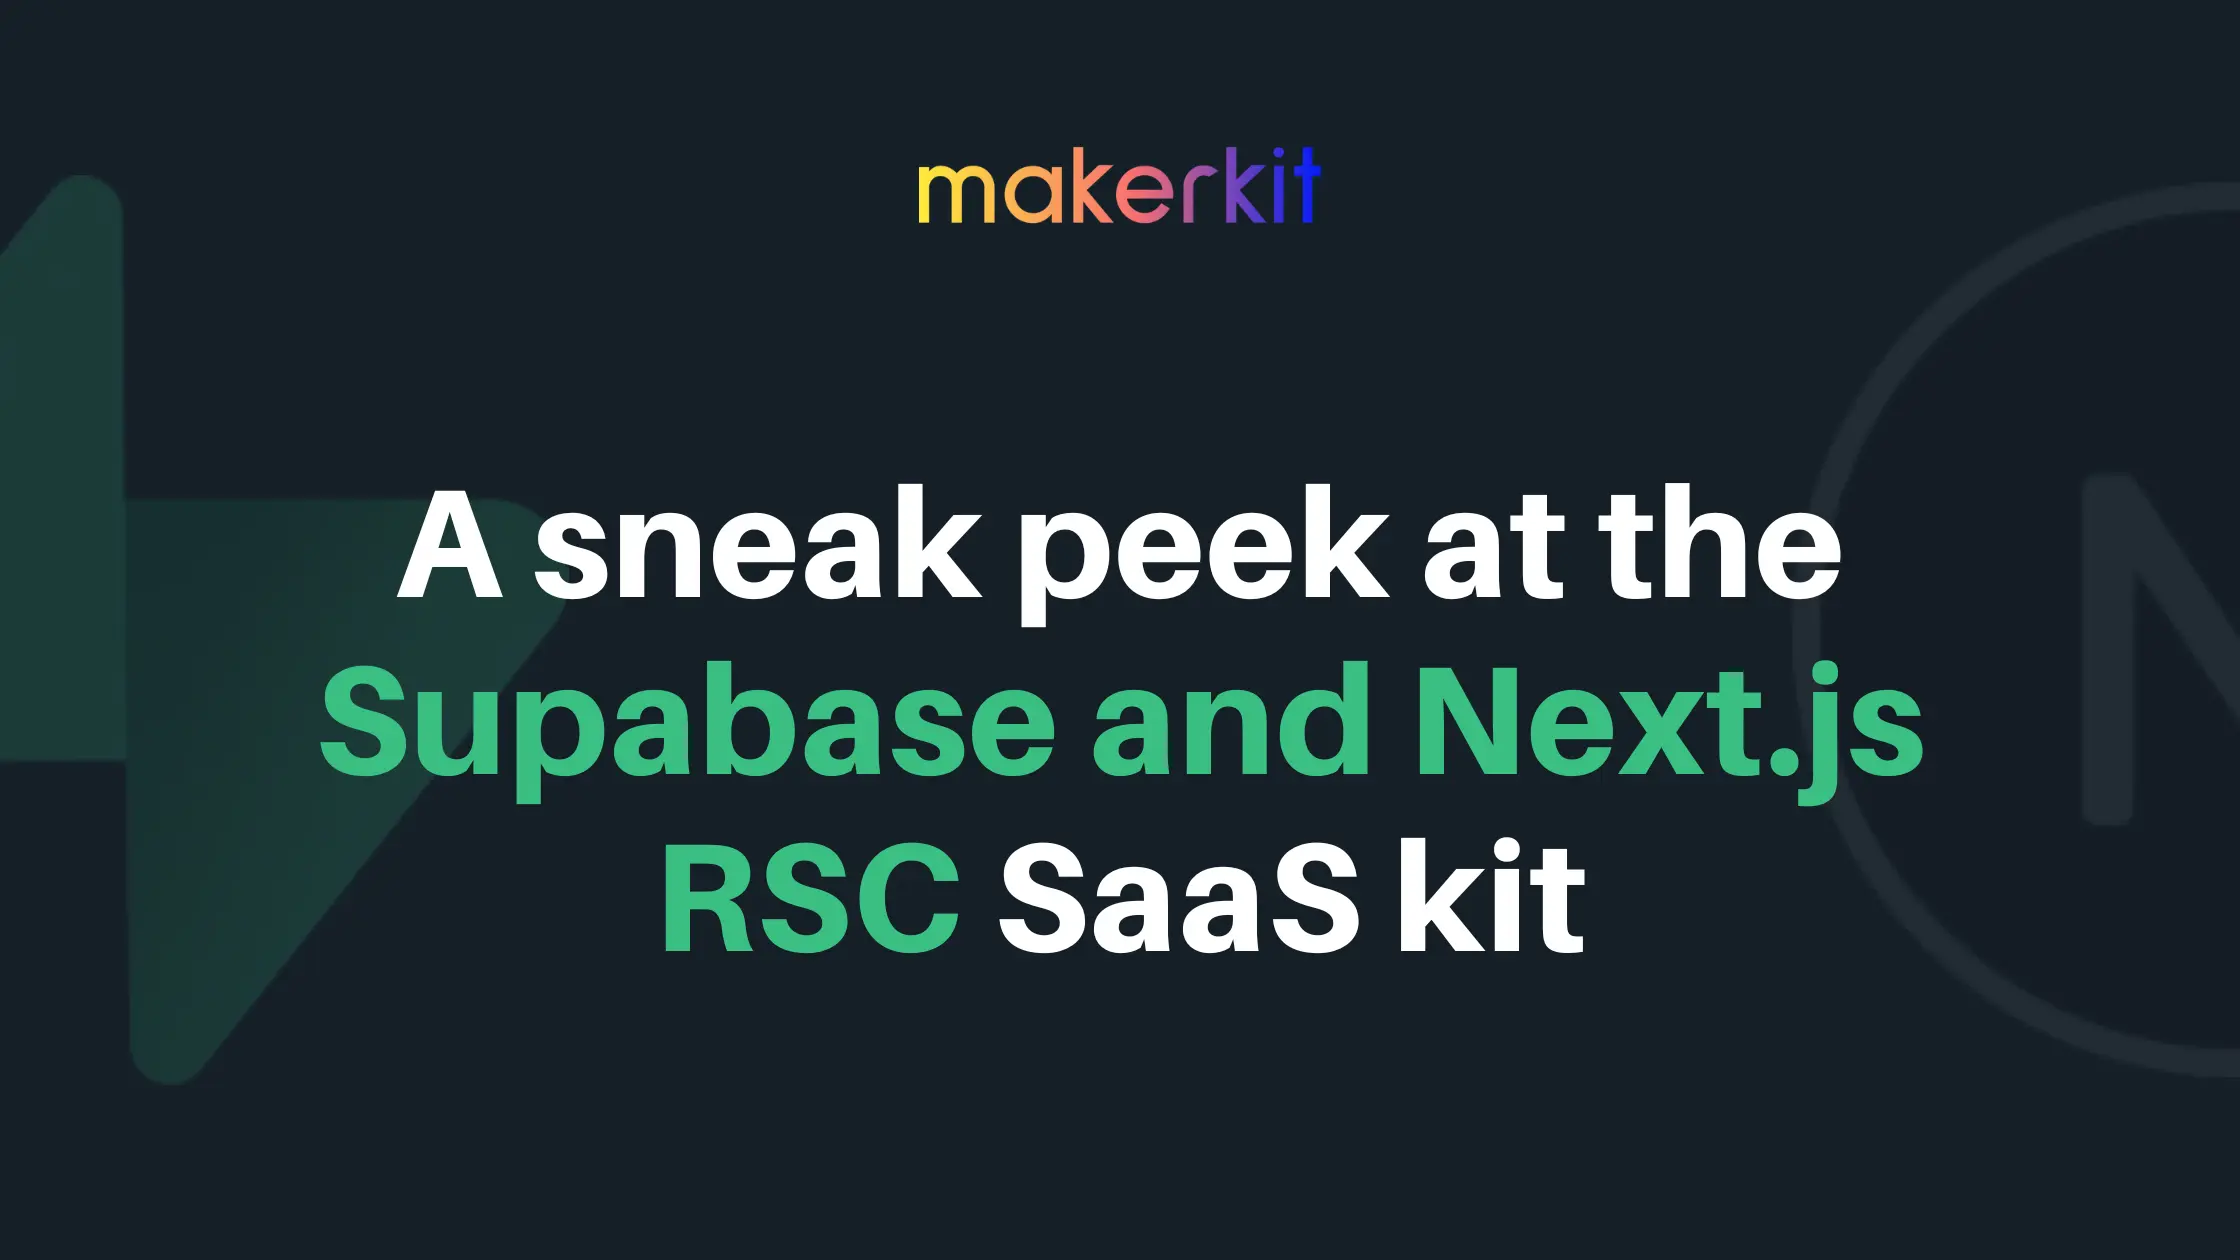 Cover Image for A sneak peek at the Supabase and Next.js RSC SaaS kit